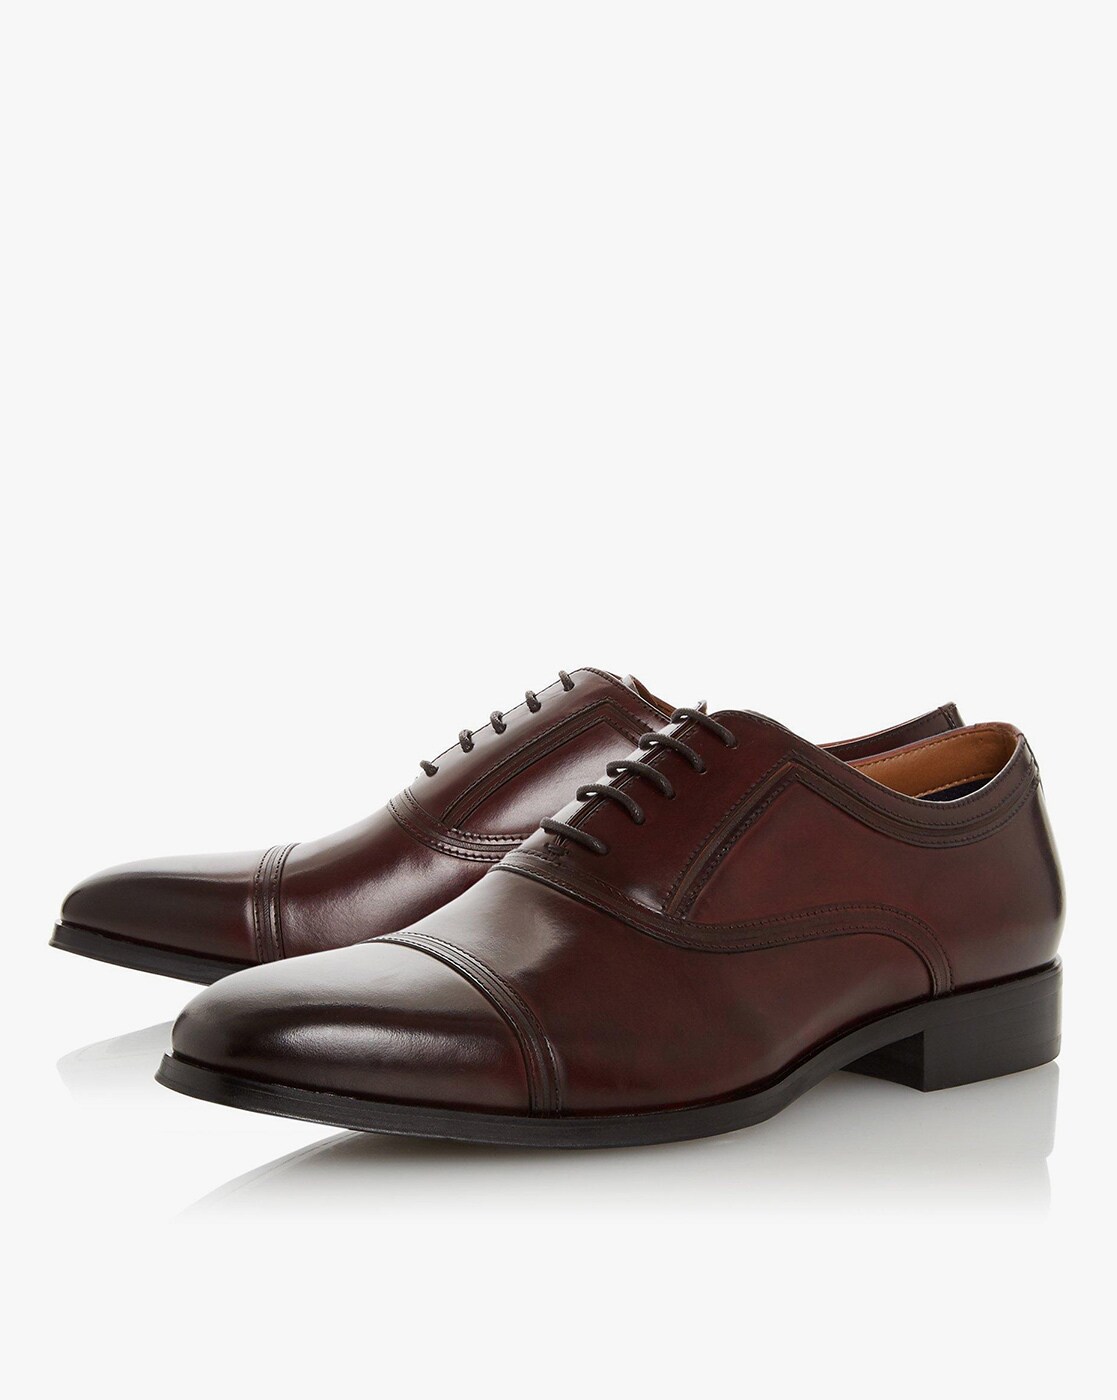 dune shoes oxford